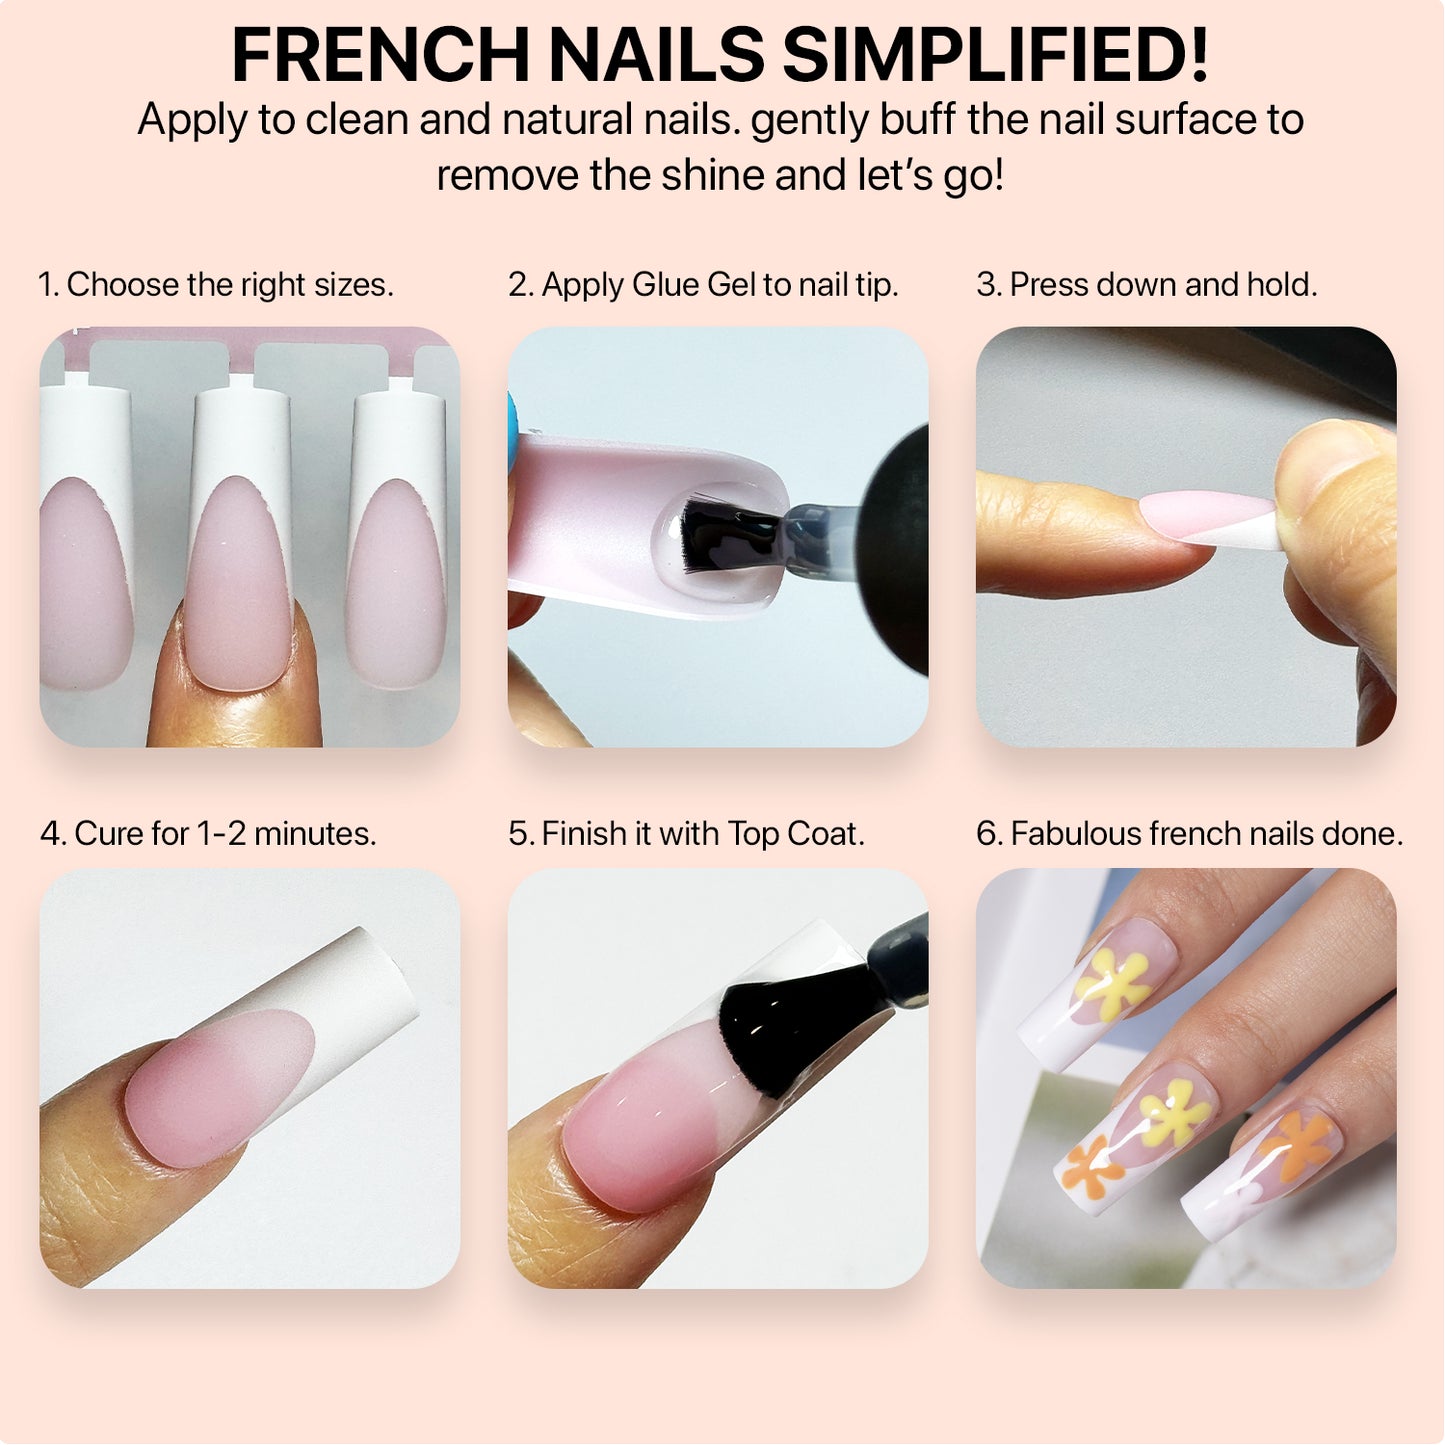 SXC Cosmetics X-Pro Tips Press on Nails, Pink XS Square French Tips, 150 Pieces in 15 Sizes Ultra Fit Acrylic Soft Gel System